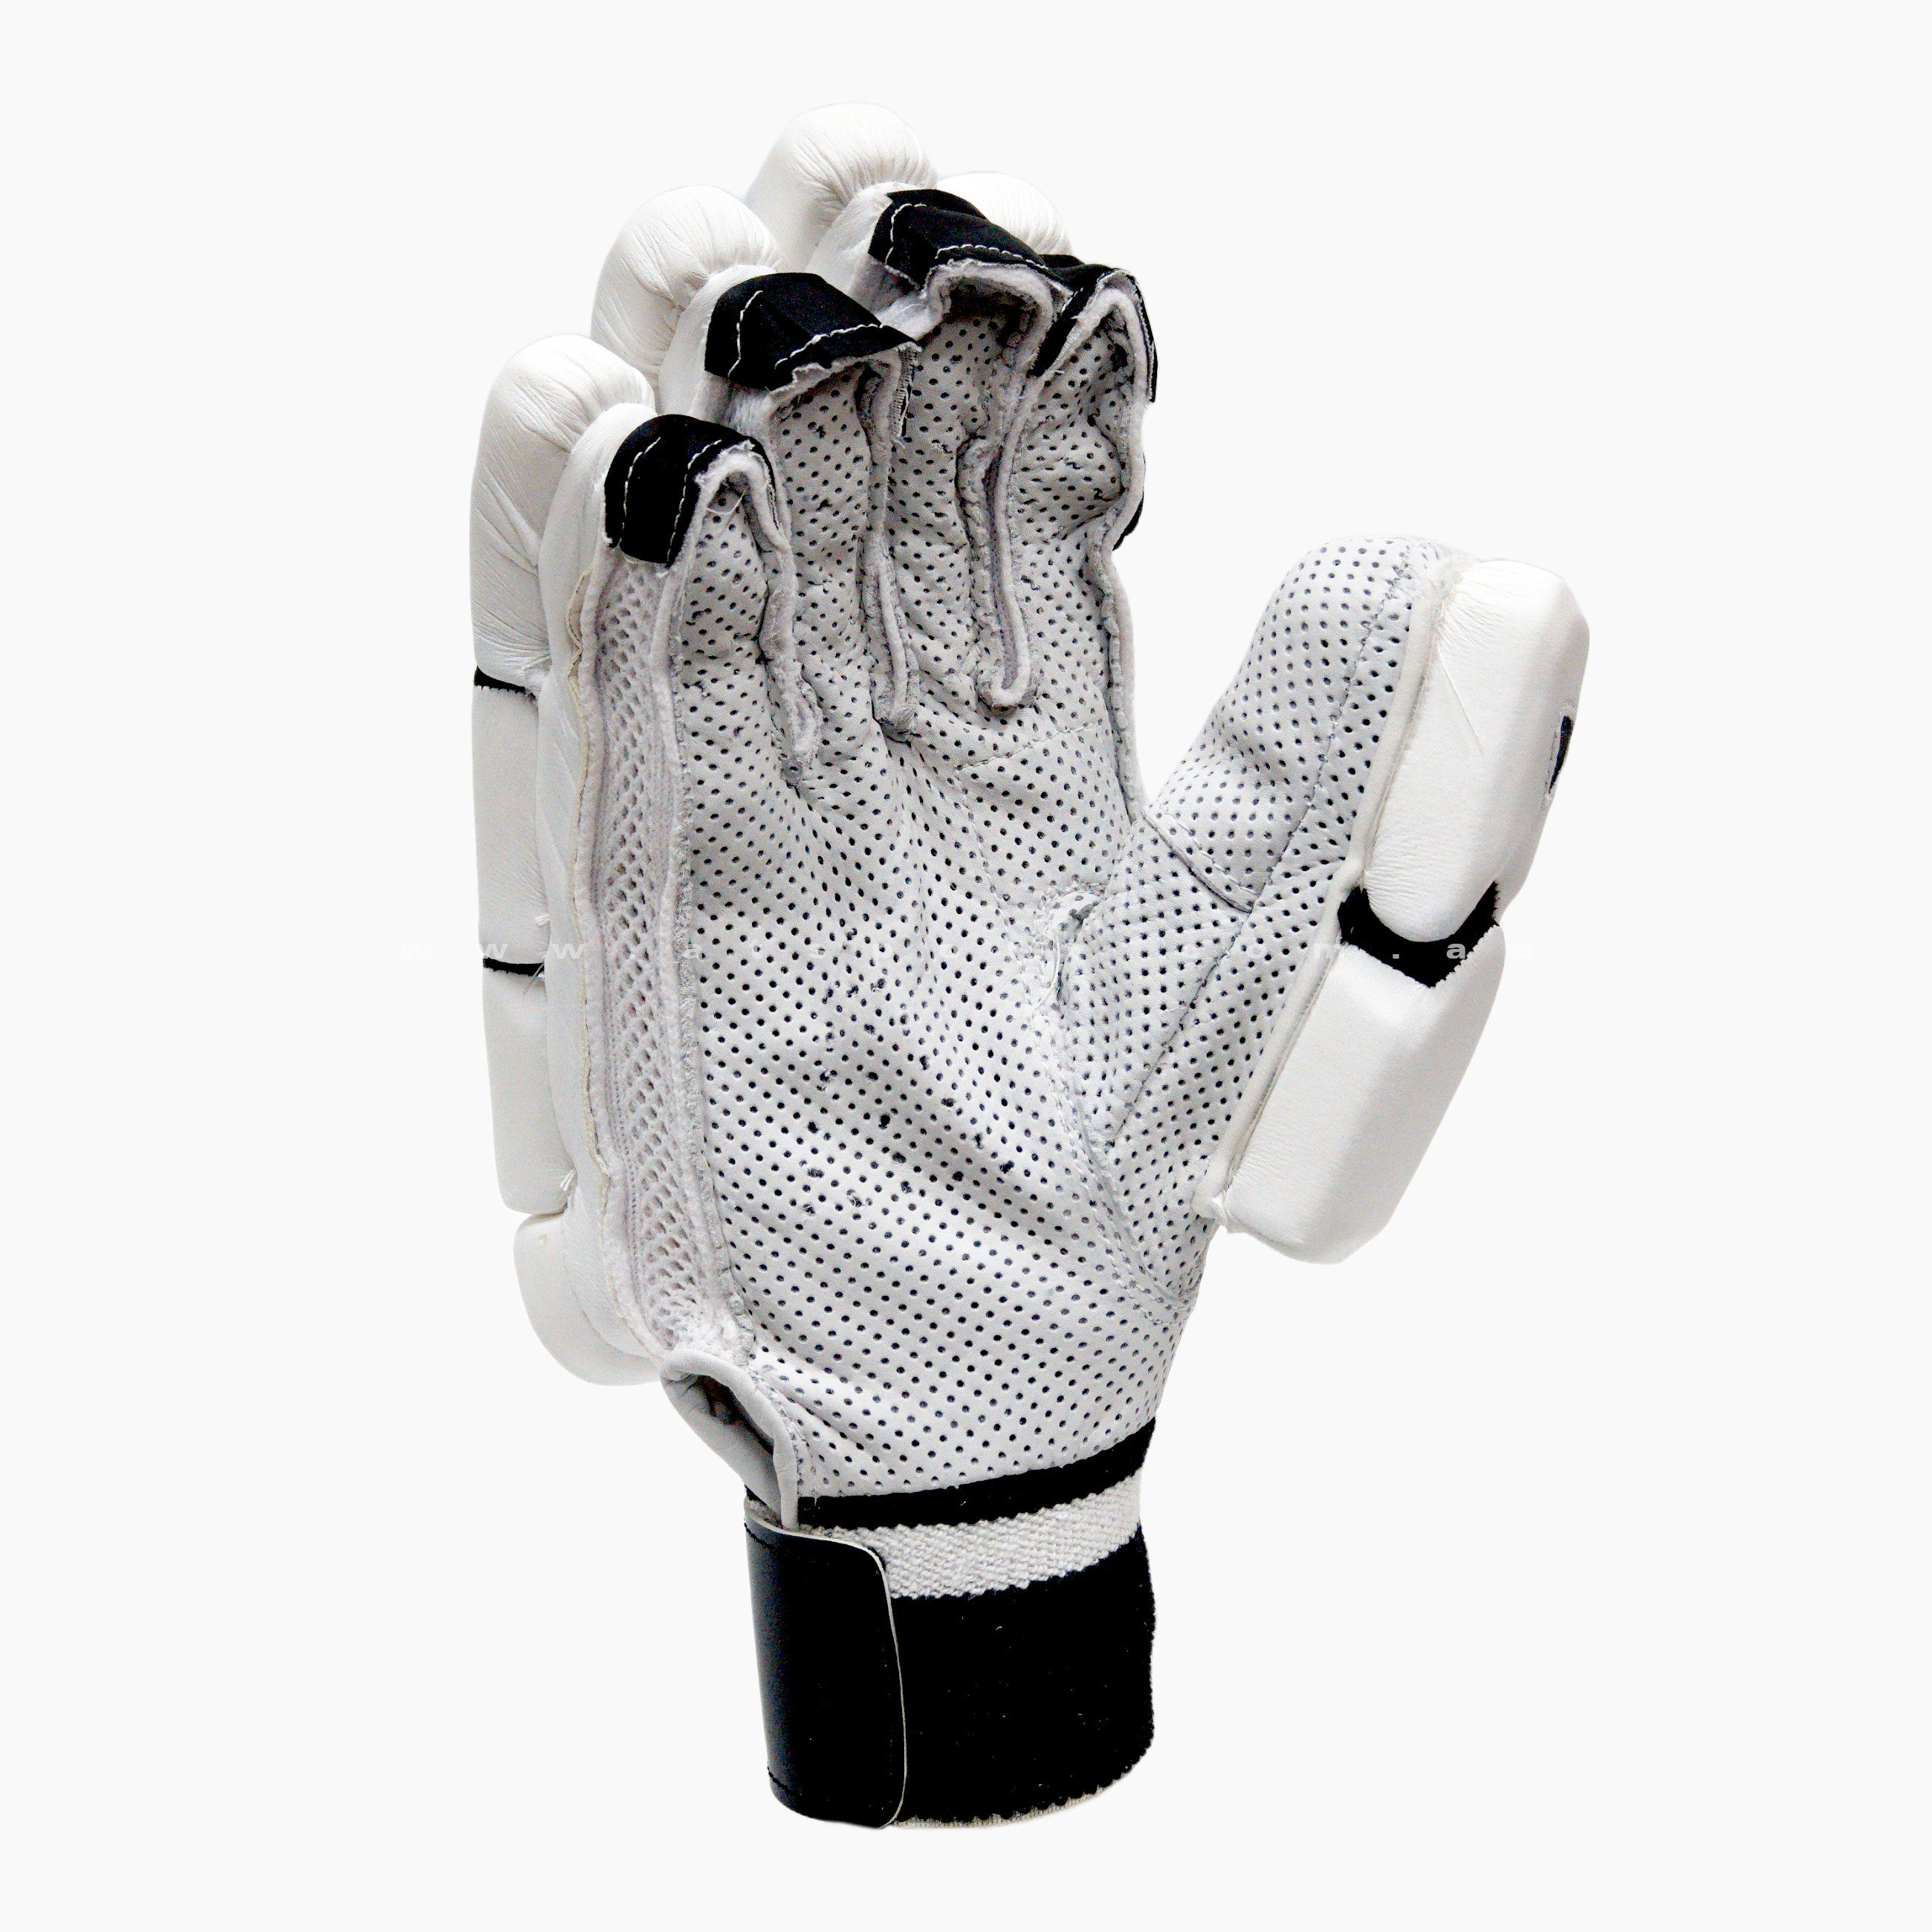 Duncan Fearnley Heritage Cricket Batting Gloves - YOUTH